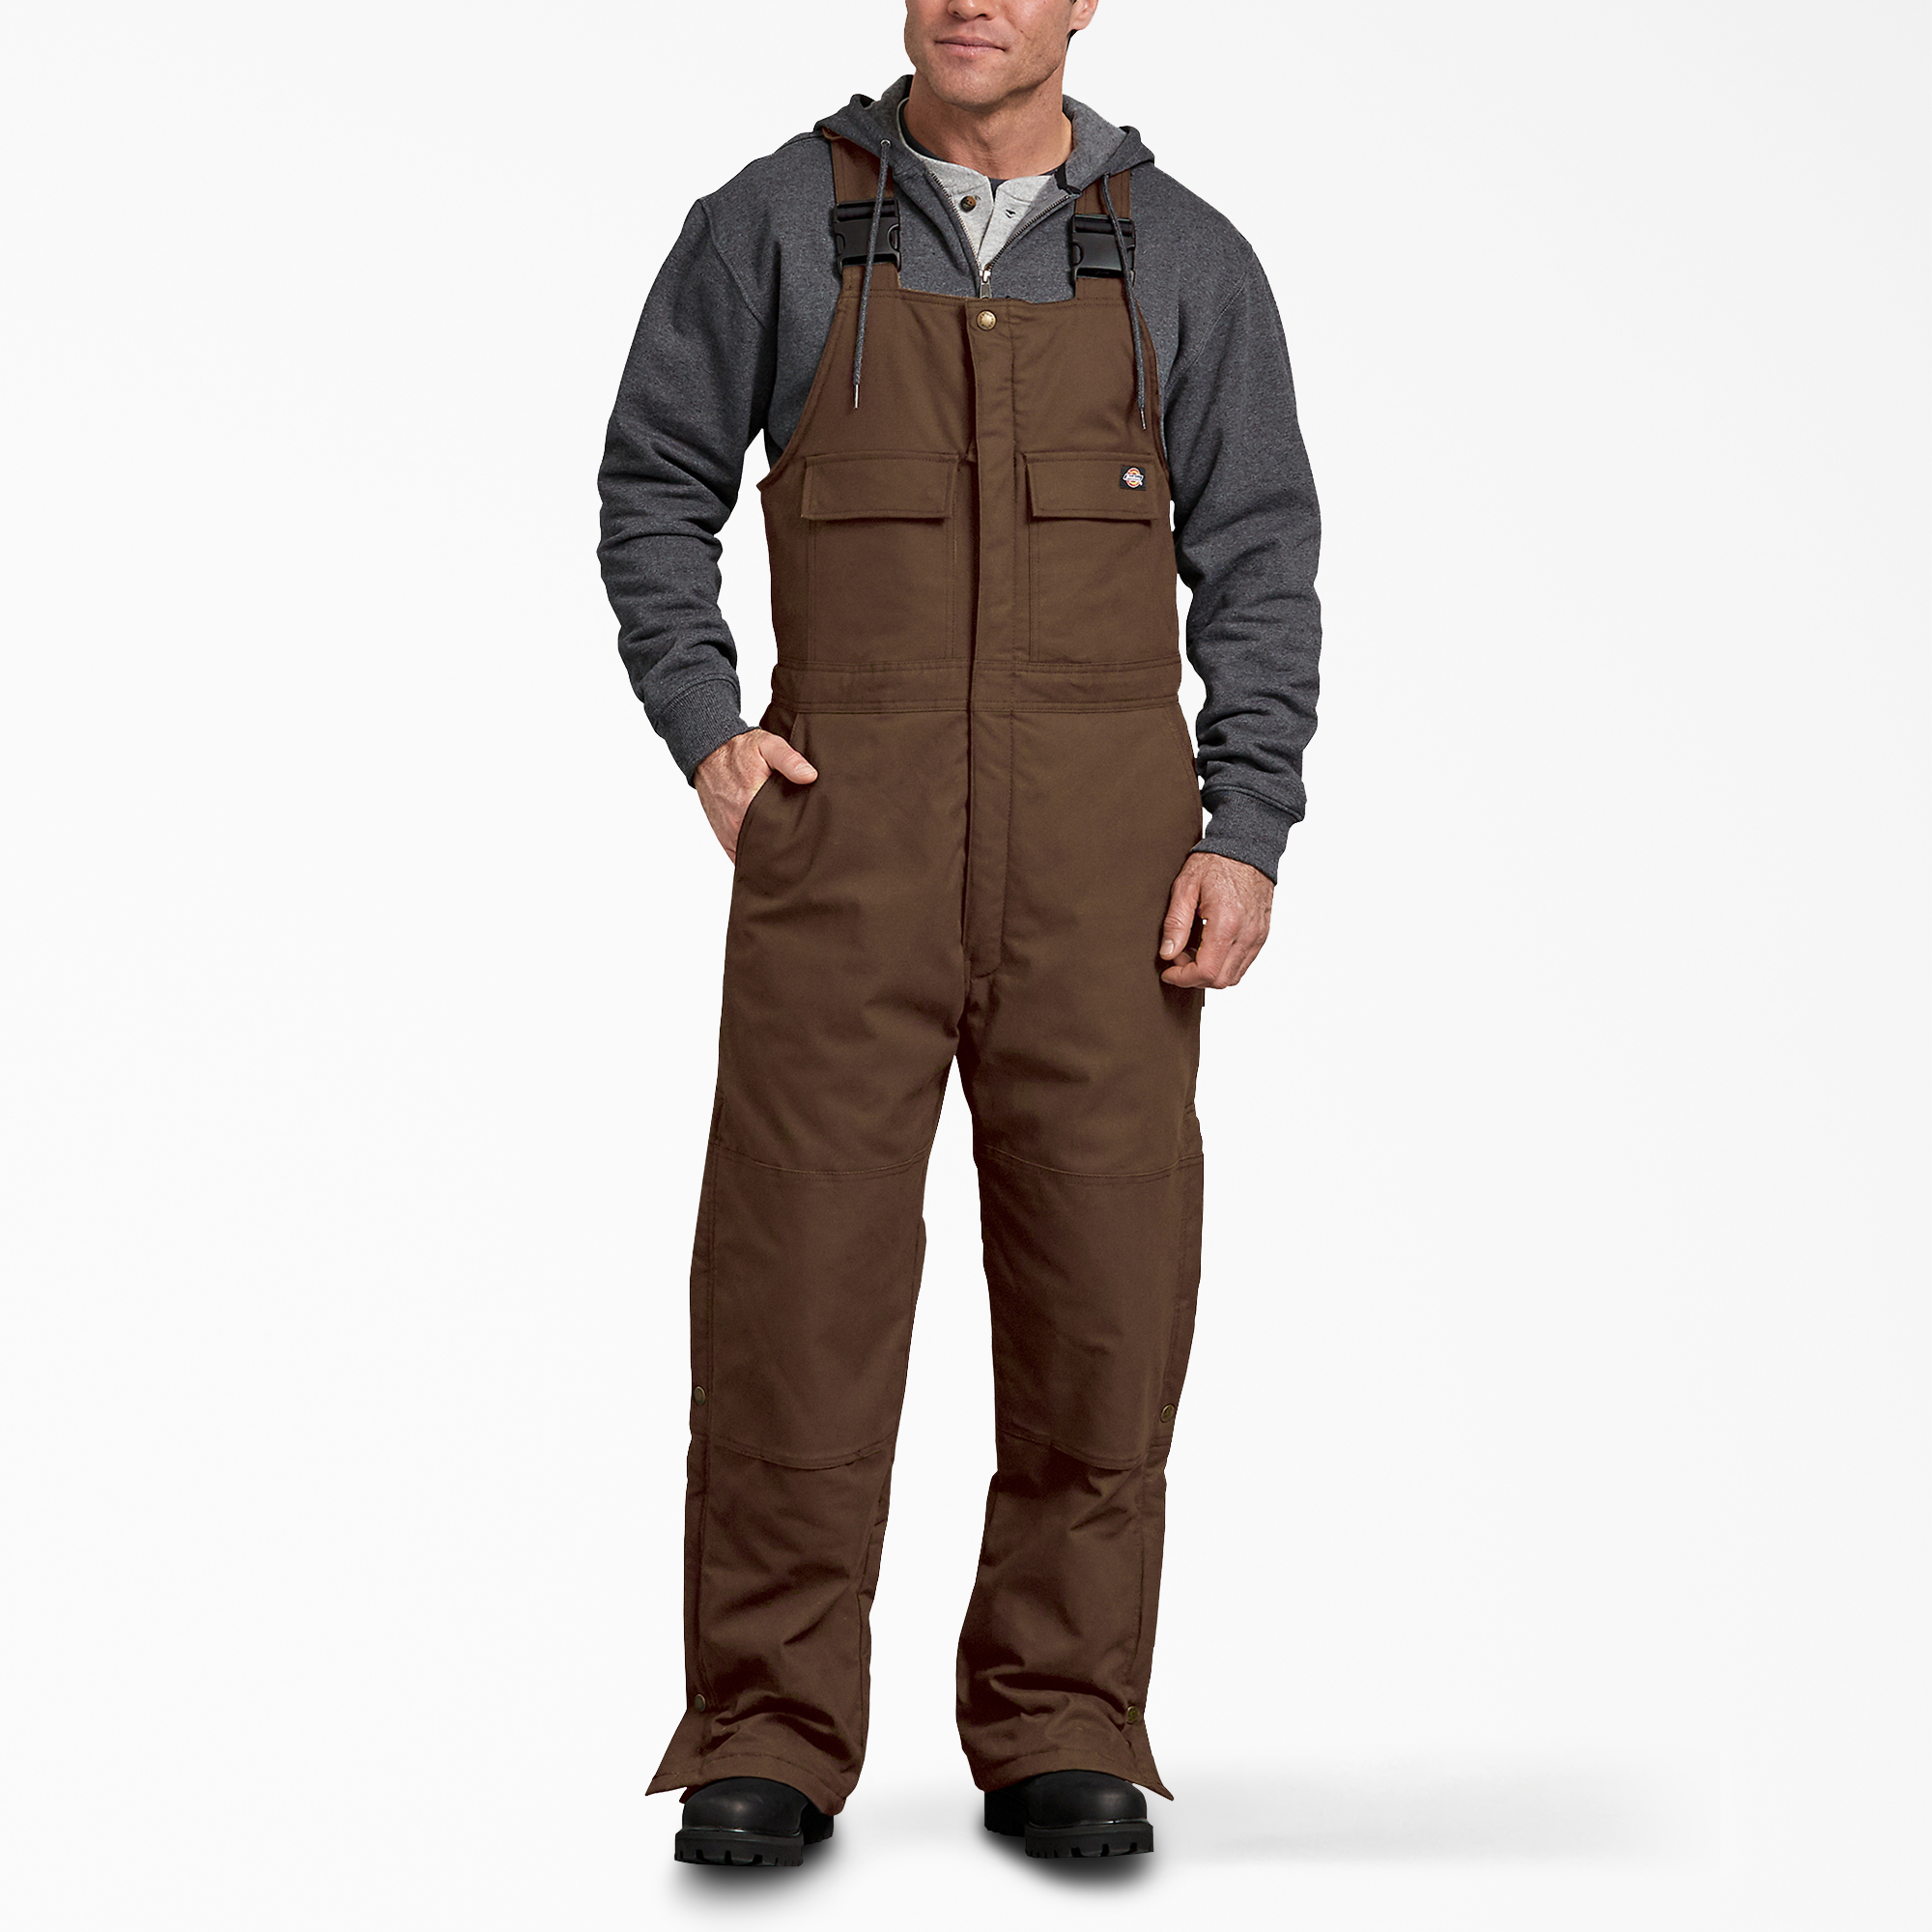 FLEX Sanded Duck Insulated Bib Overalls - Timber Brown (TB)